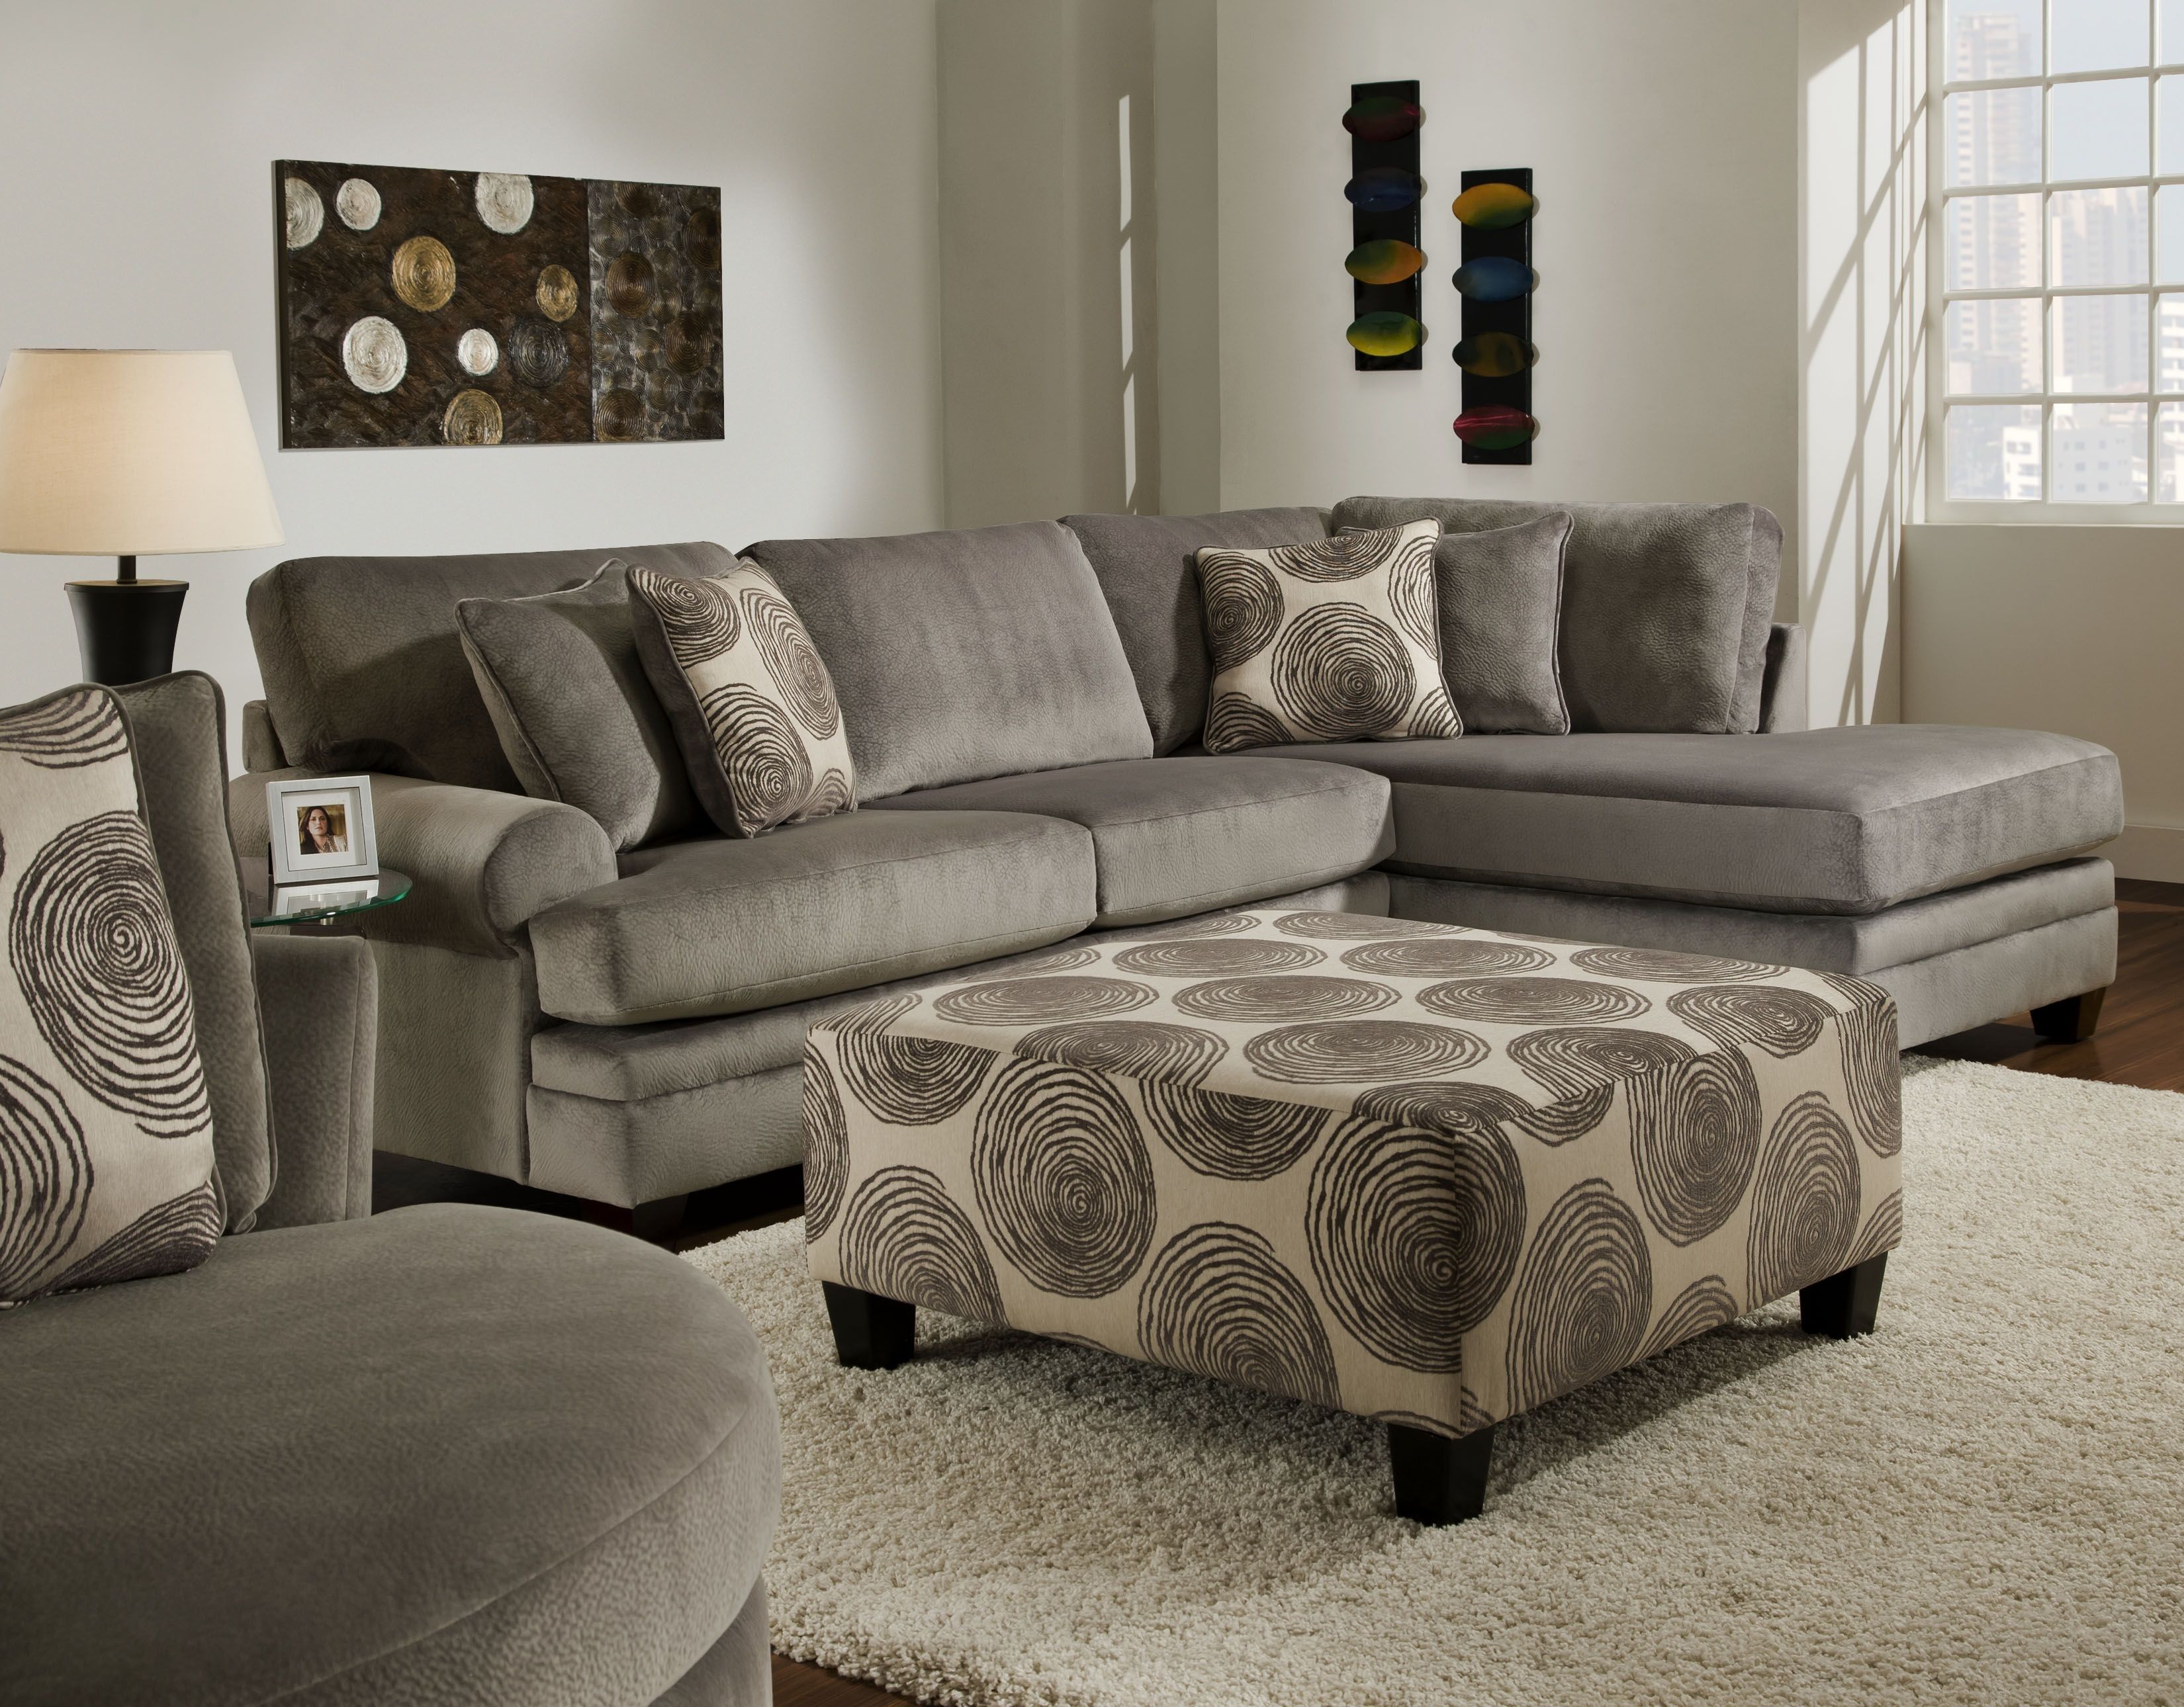 Groovy Champion Grey Sectional 2 Pc $1,195 @ Cornerstone Furniture Intended For Las Vegas Sectional Sofas (View 7 of 10)